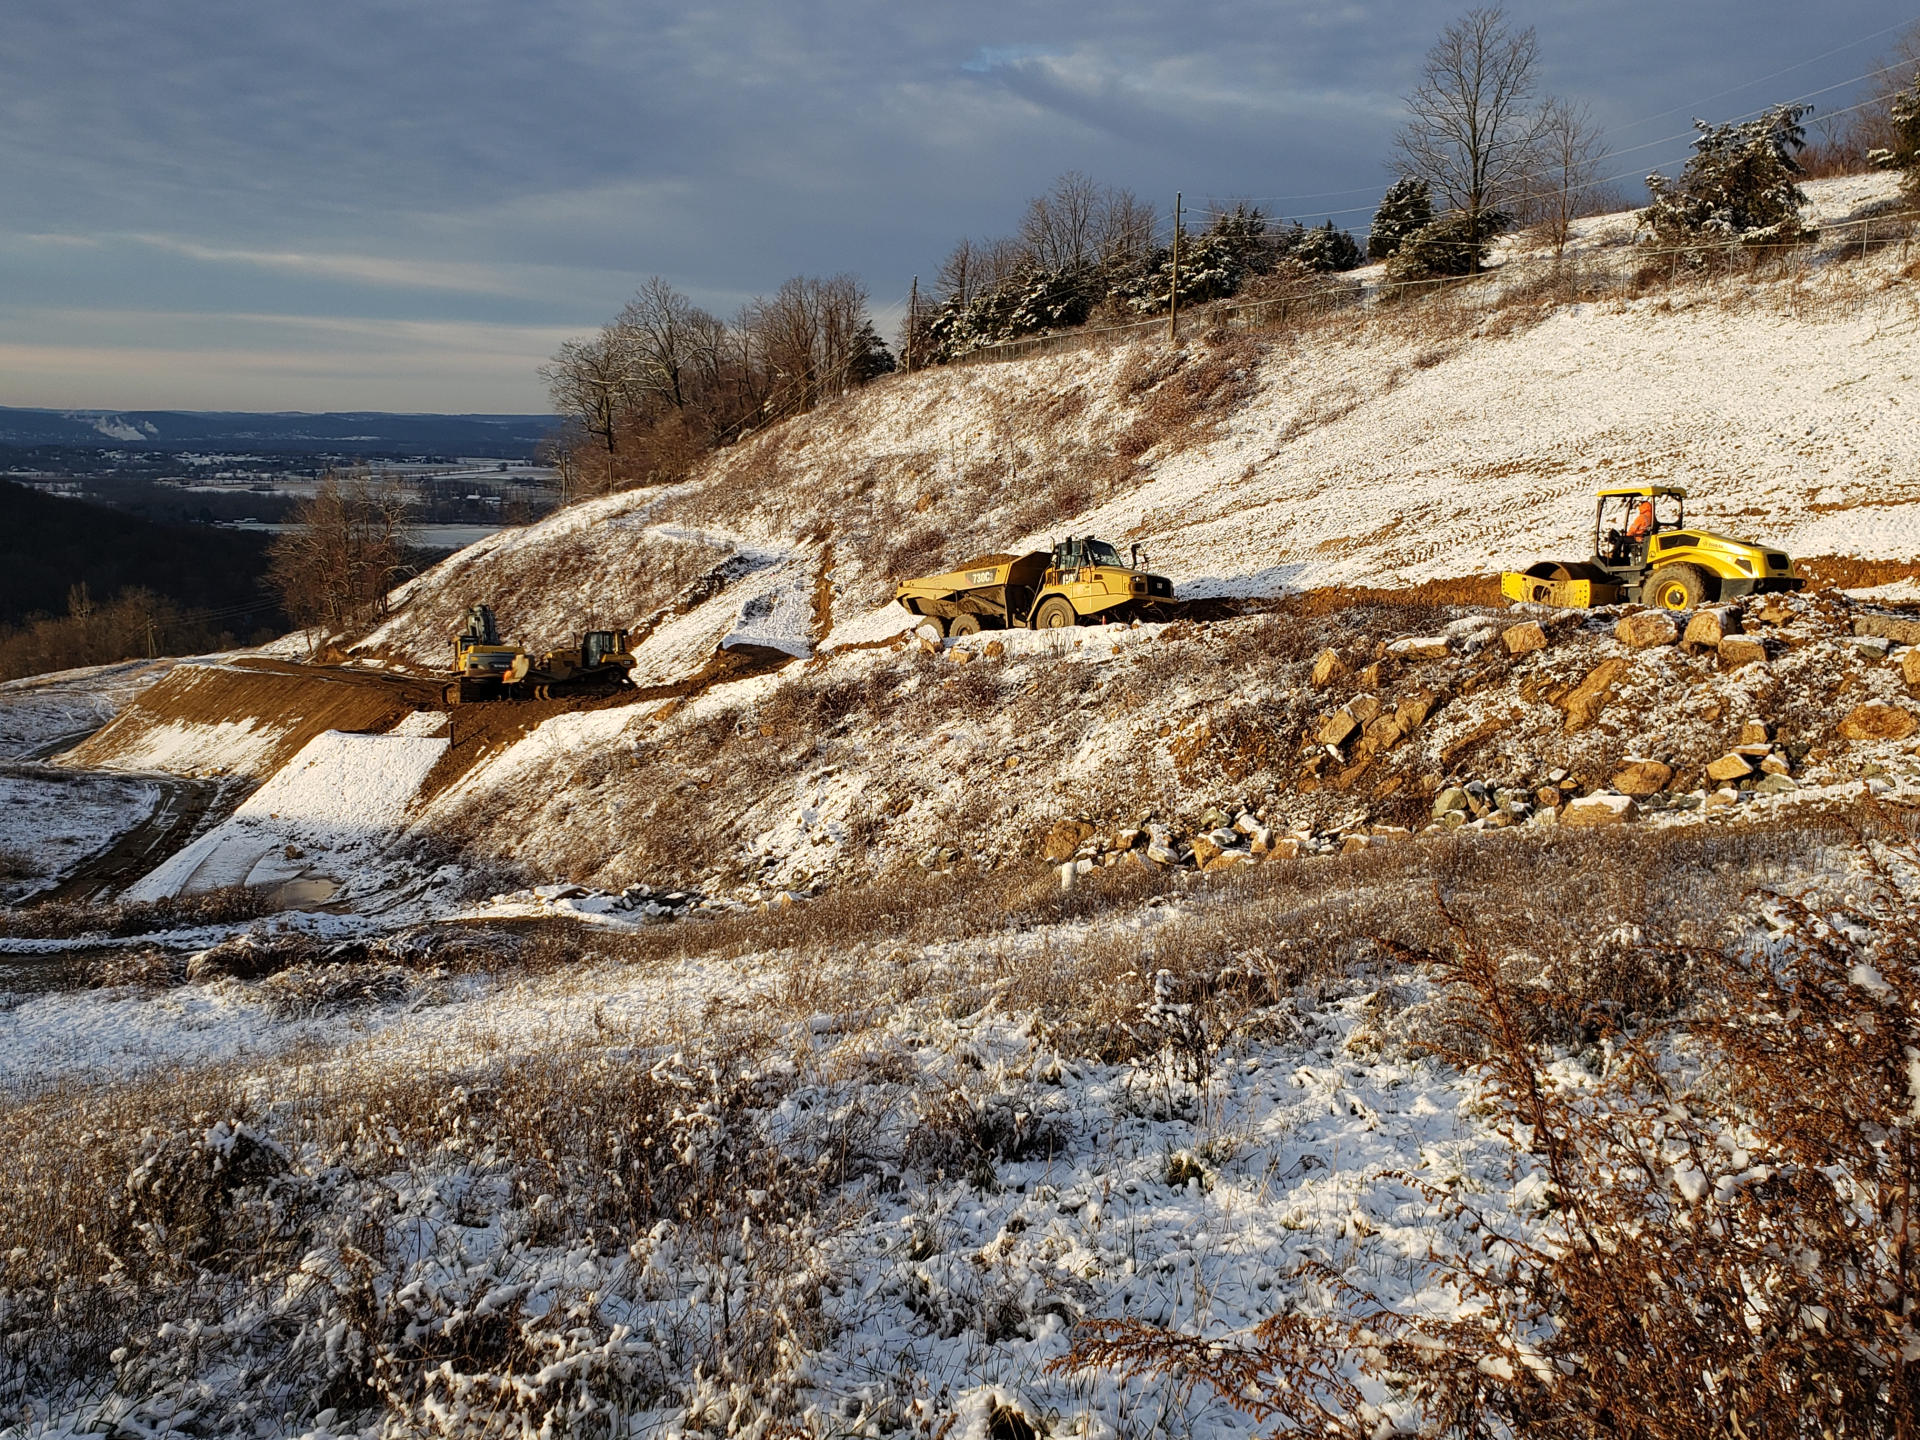 A row of yellow tractors are driving down a snowy hillside.